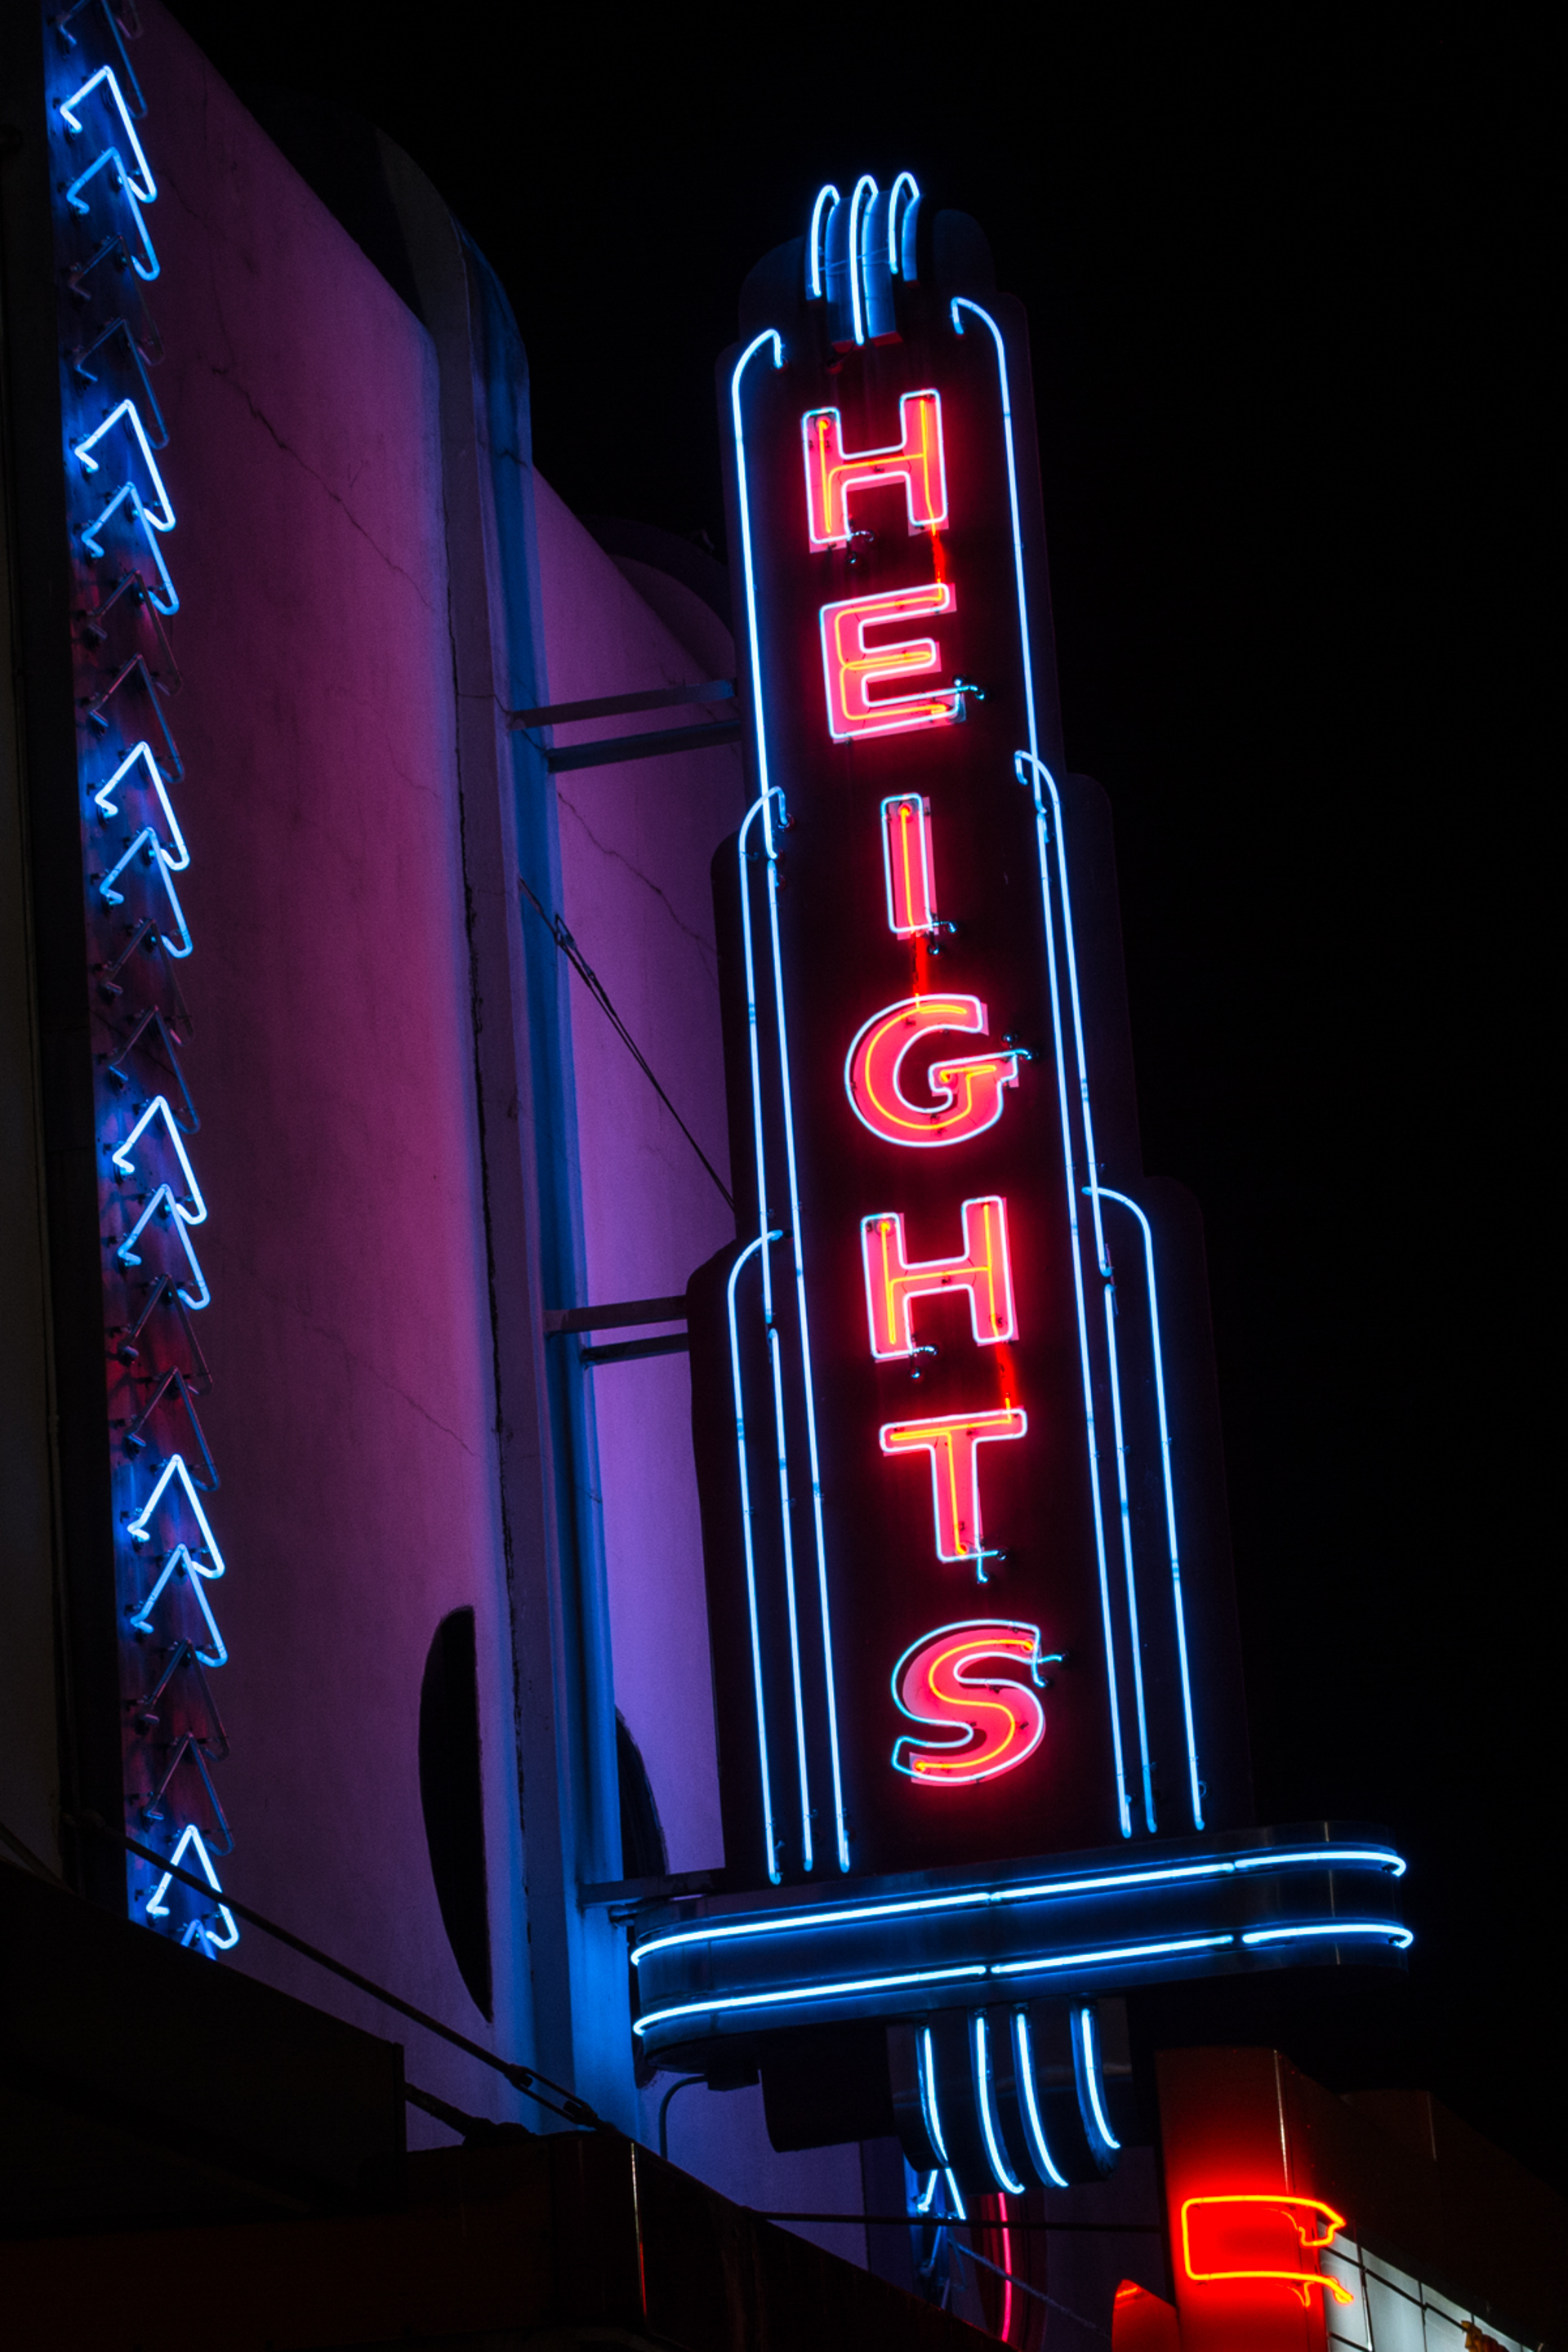 Heights Theatre No. 1 by James C. Ritchie